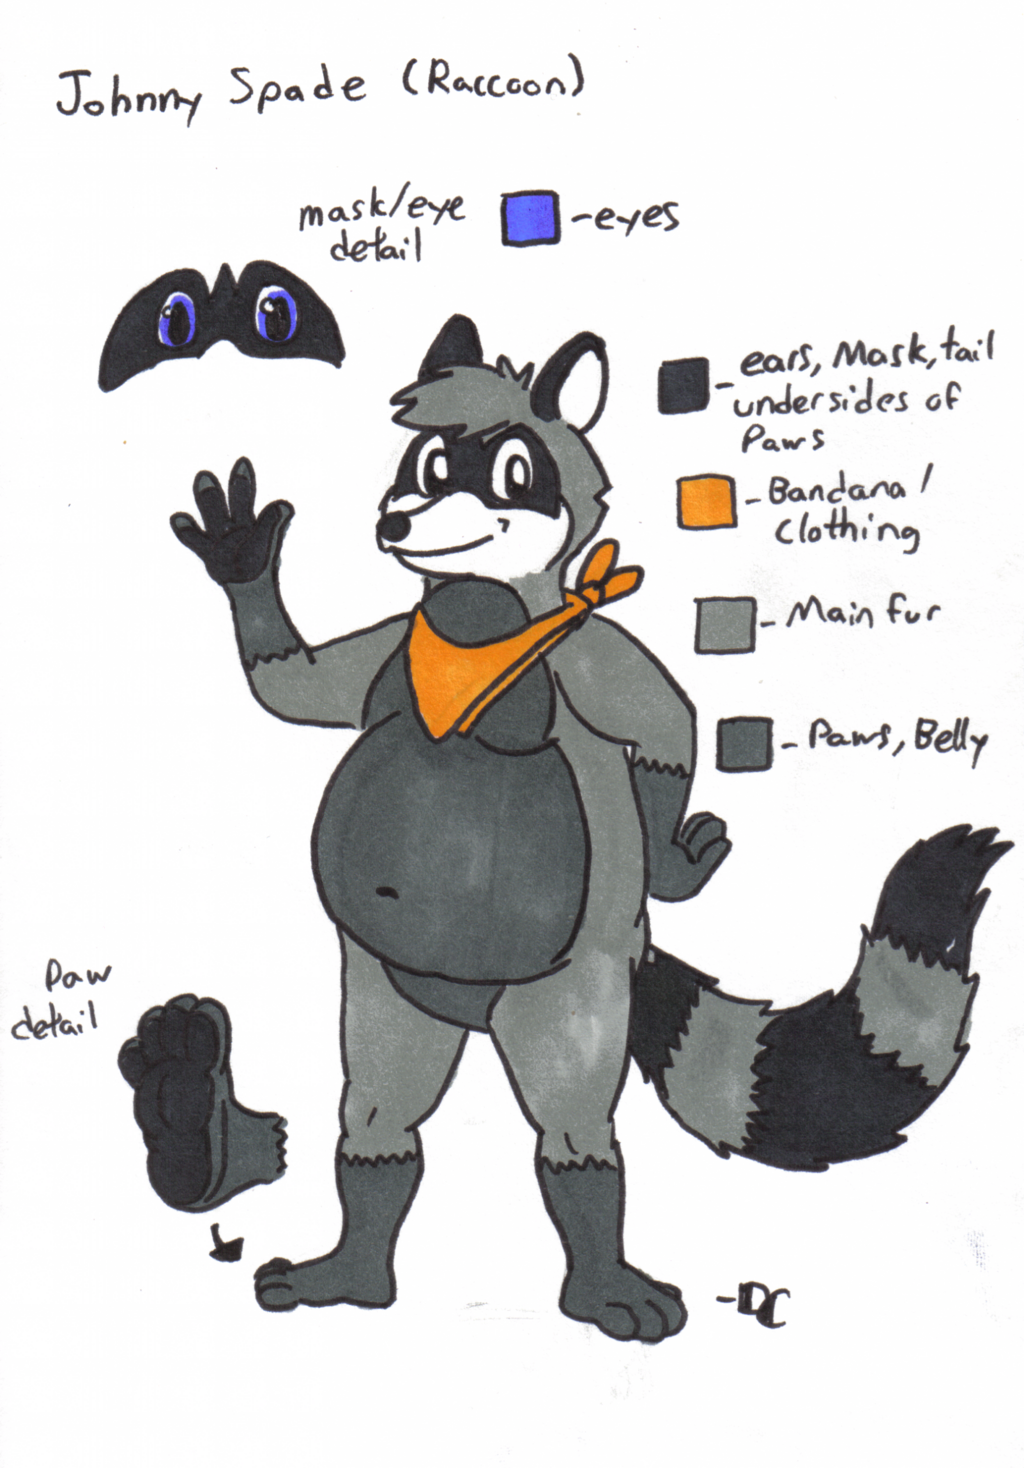 Most recent image: Johnny Spade (Raccoon) "Reference"